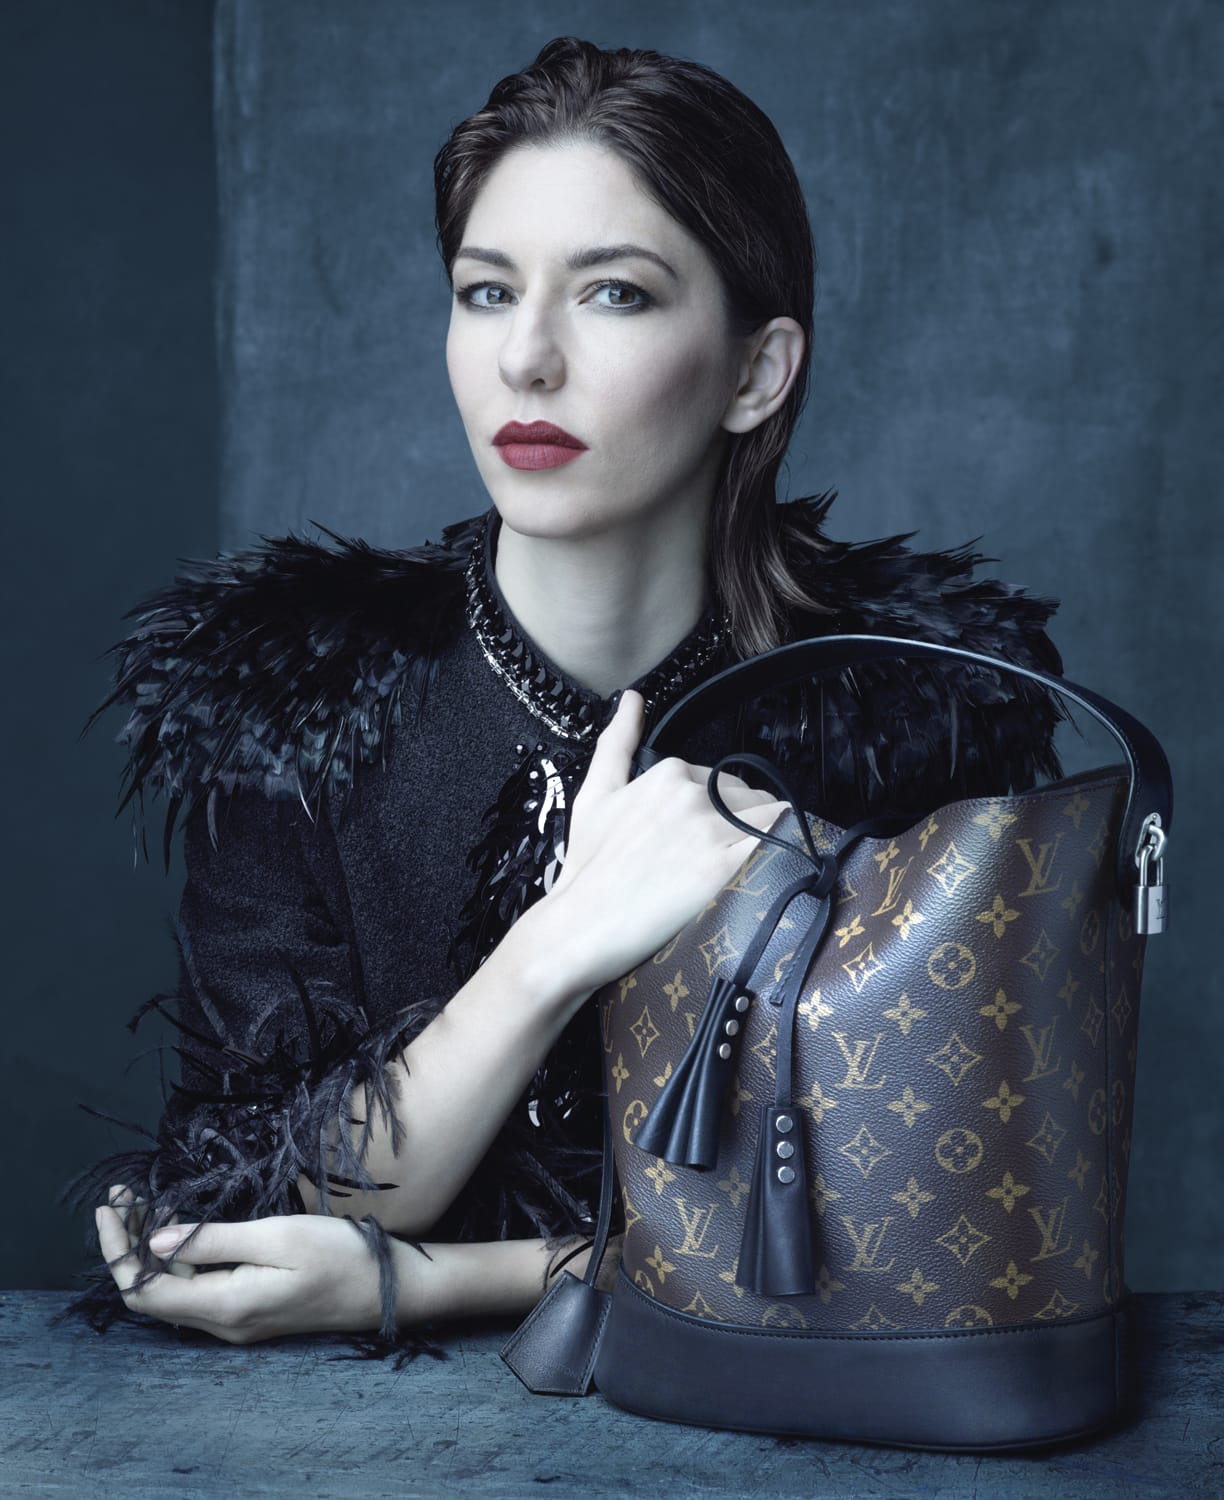 Accessories collection from Sofia Coppola for Louis Vuitton